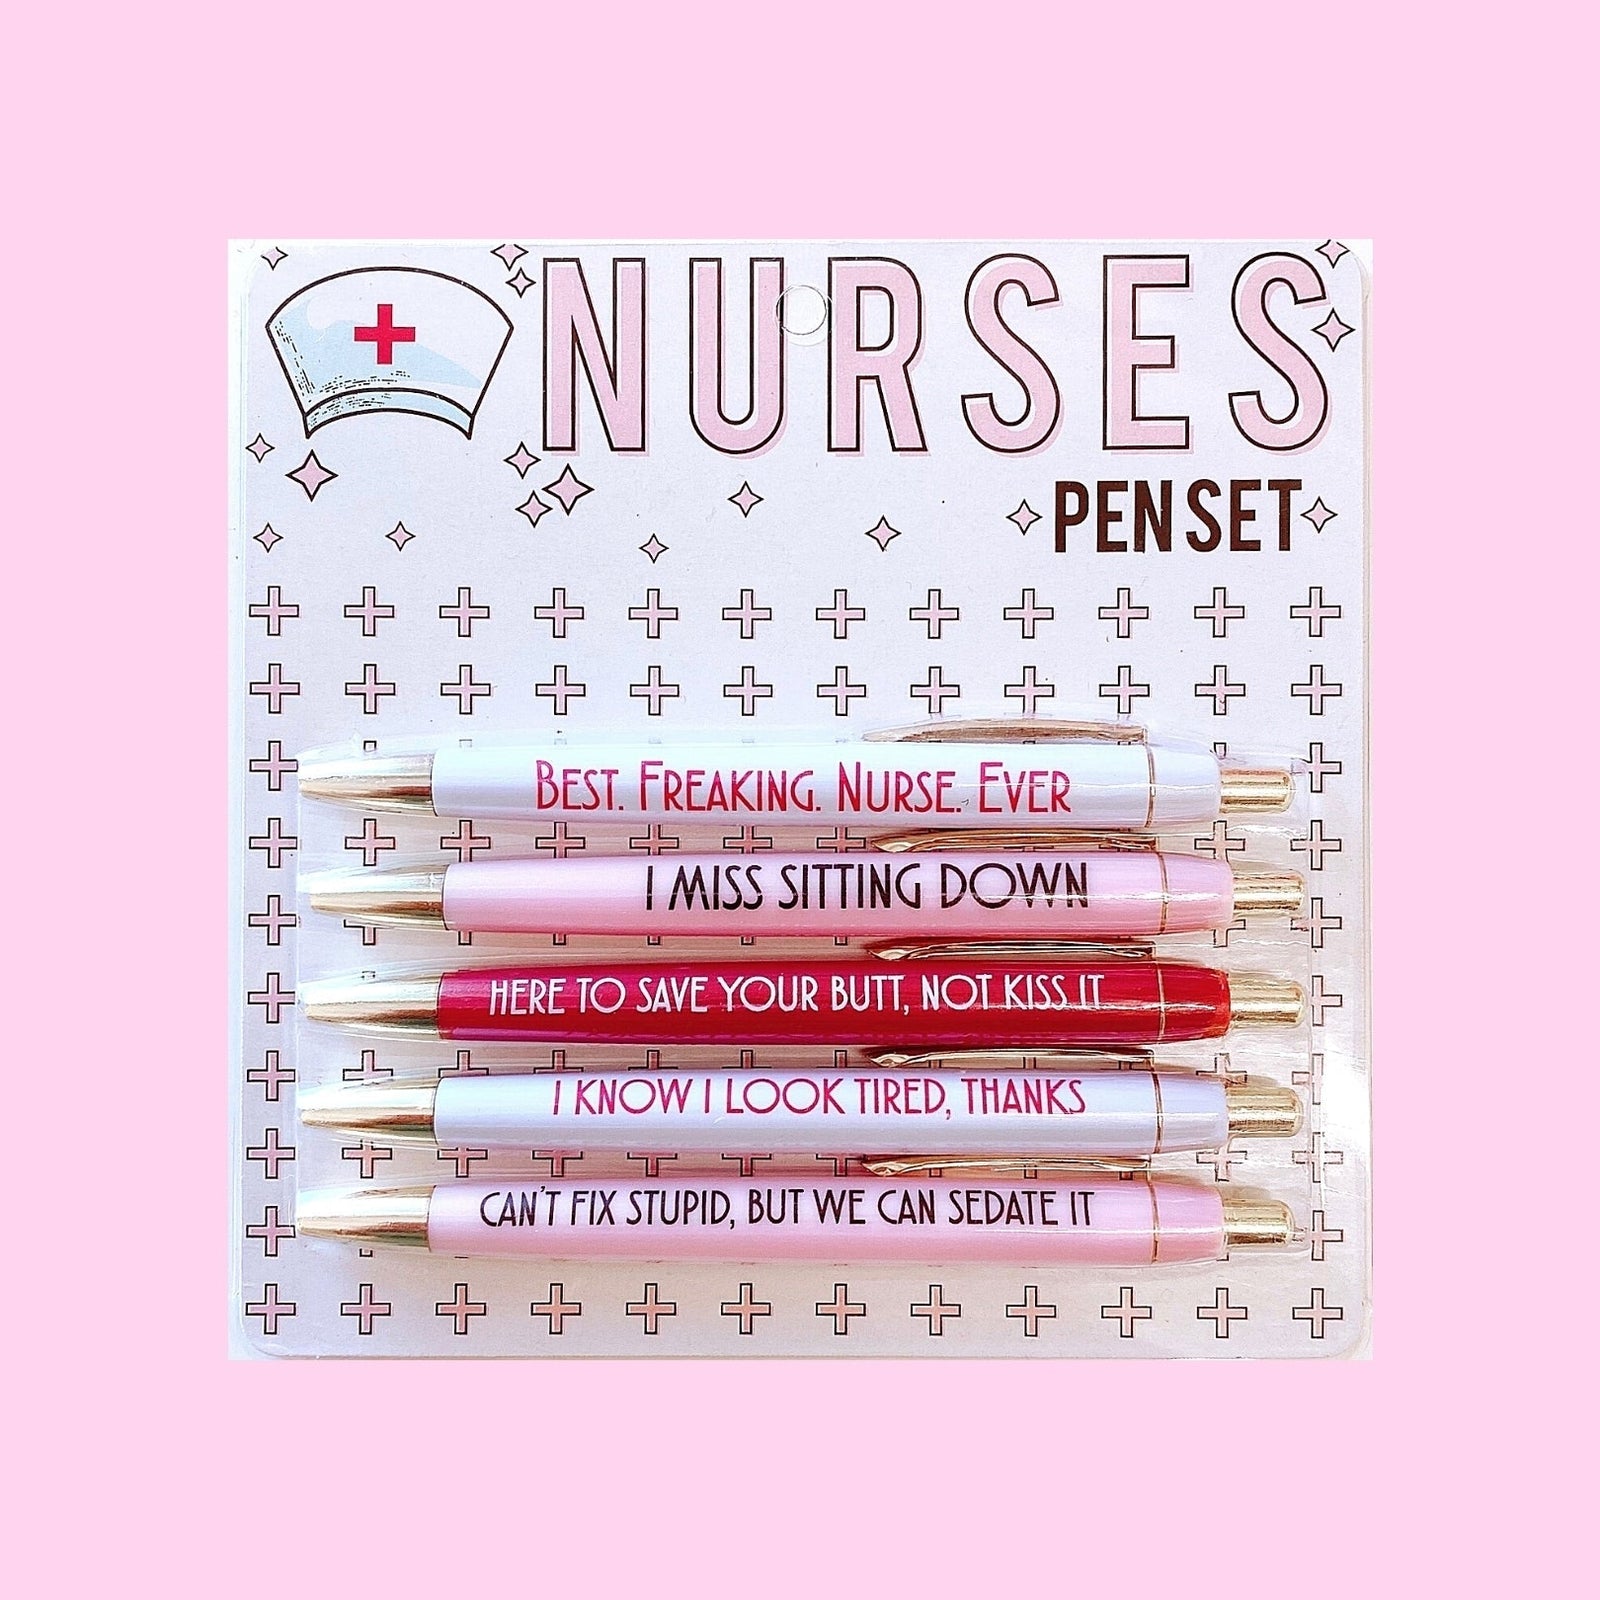 Fun Club Nurses Multicolor Pen Set | 5 Funny Pens Packaged for Gifting | Best. Freaking. Nurse. Ever. , I Miss Sitting Down